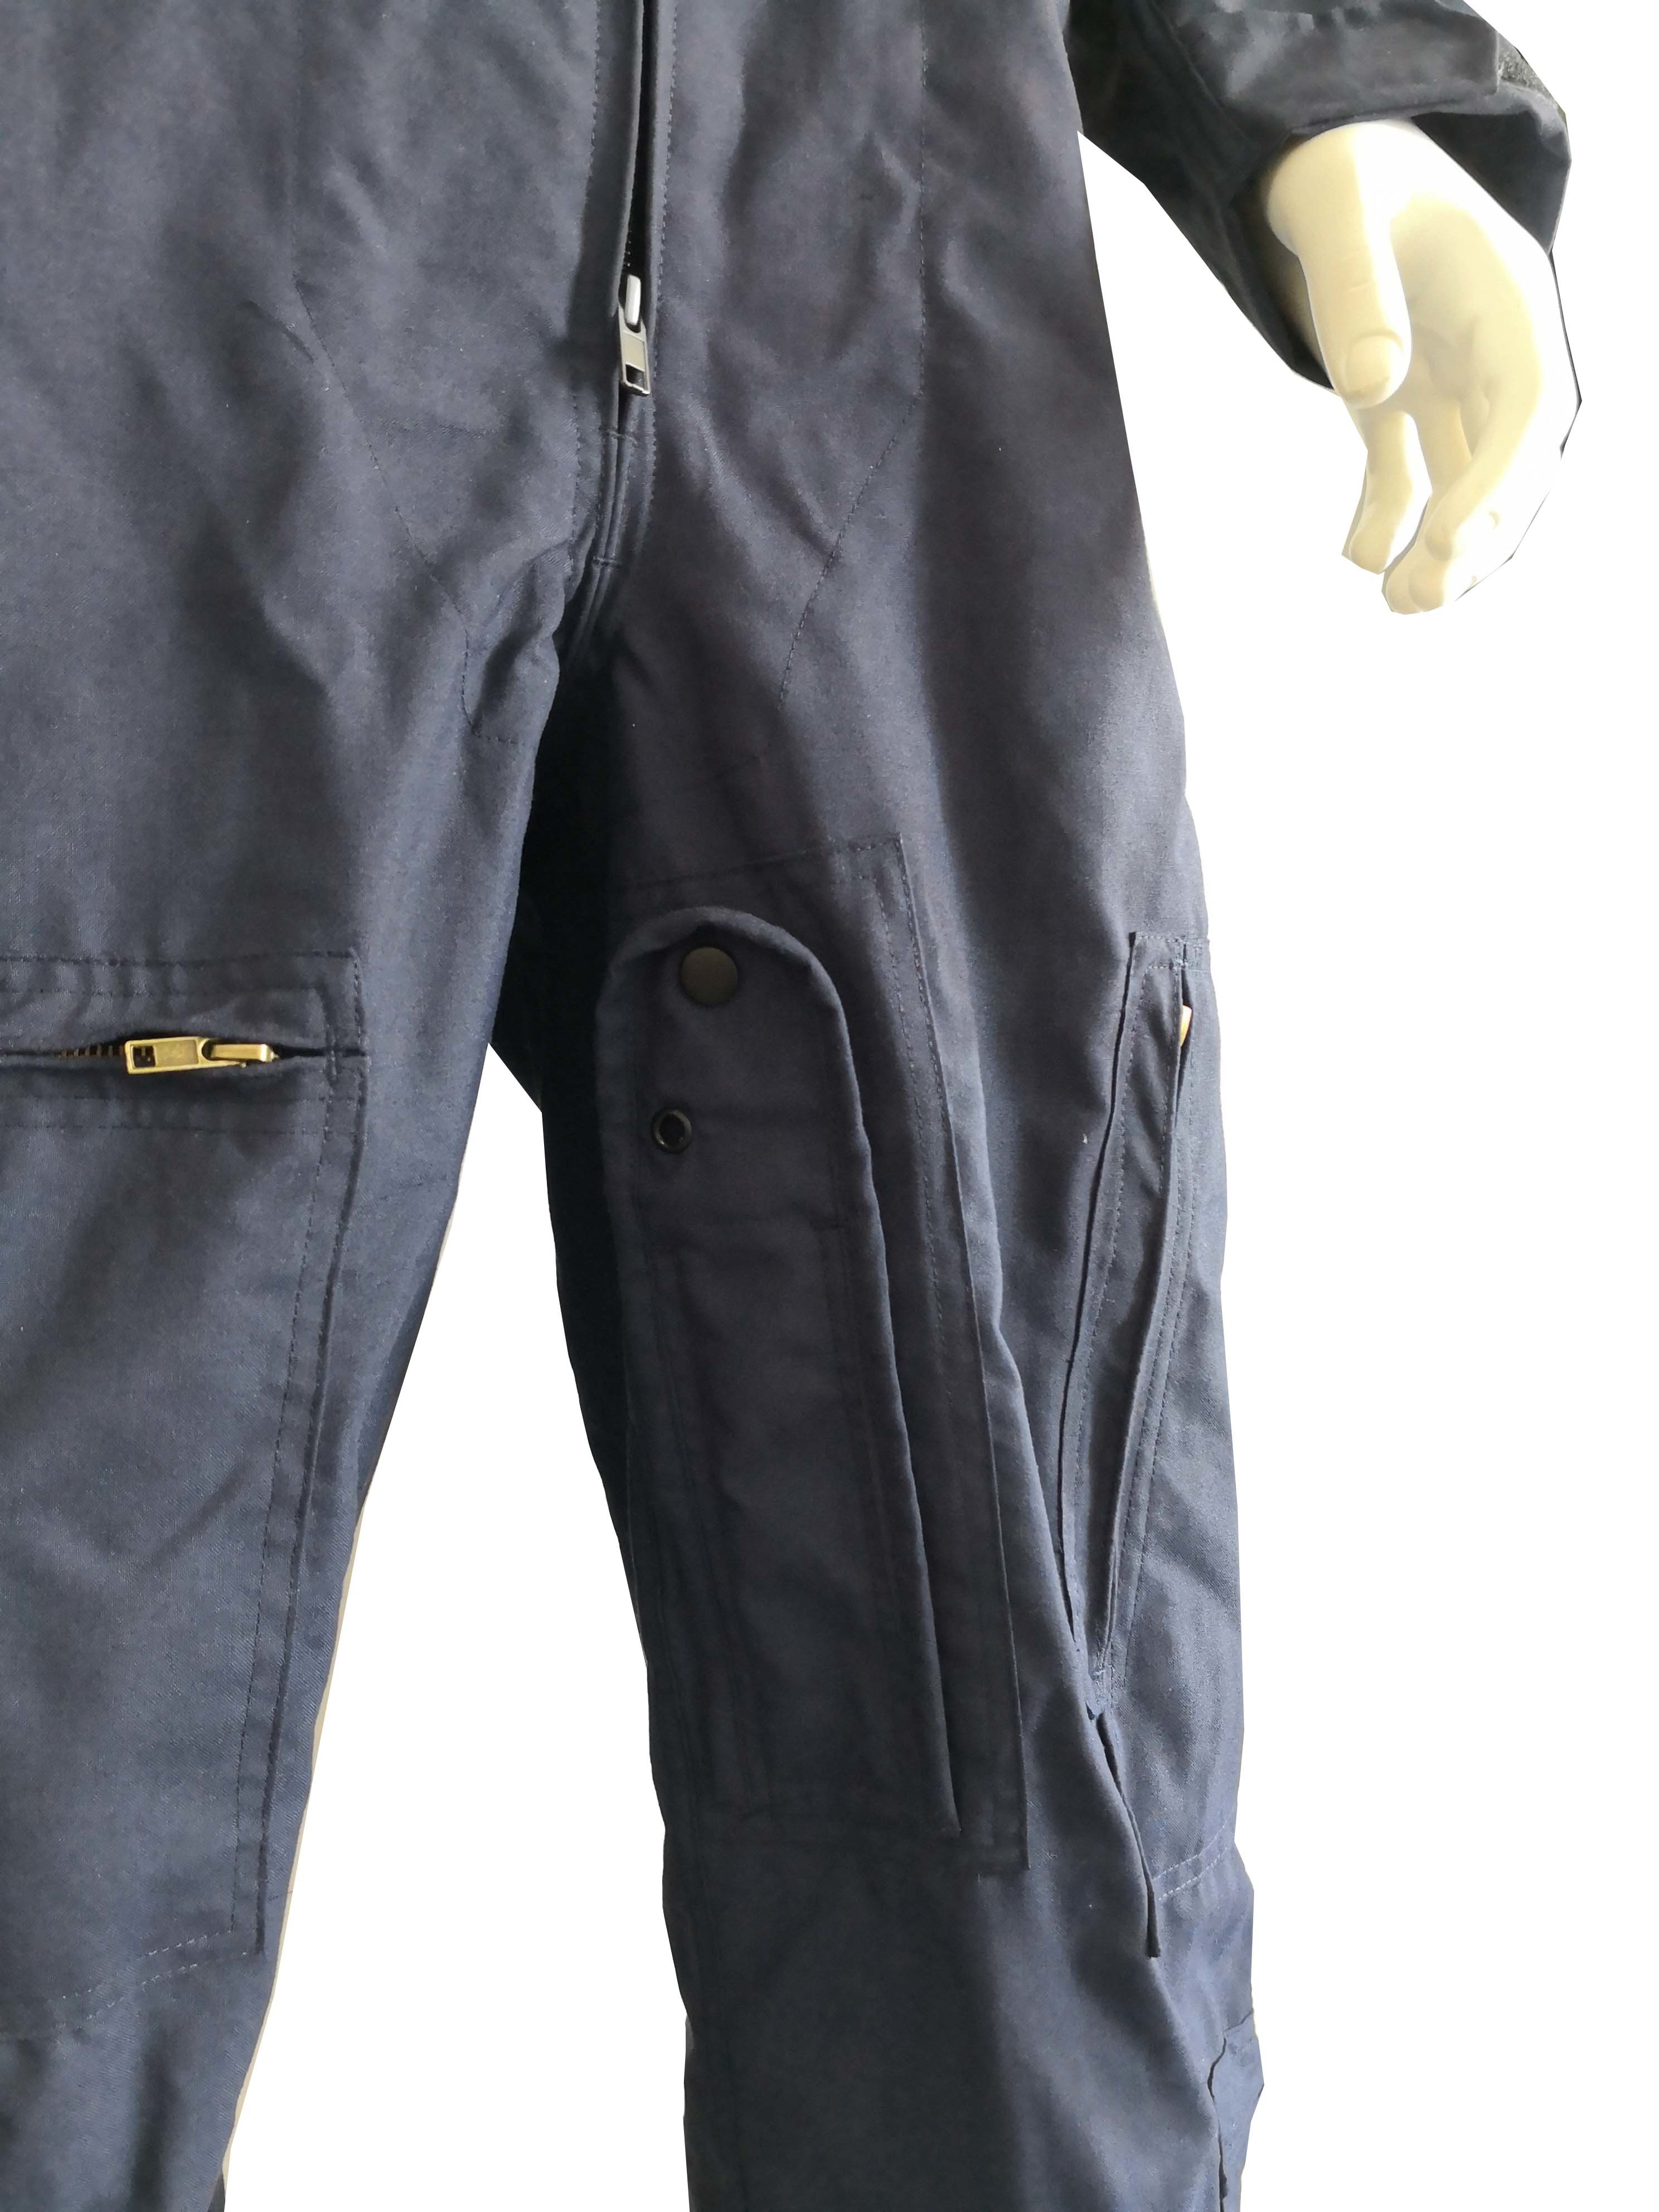 Military Fire-Retardent Flight Overall Working Uniform Suits